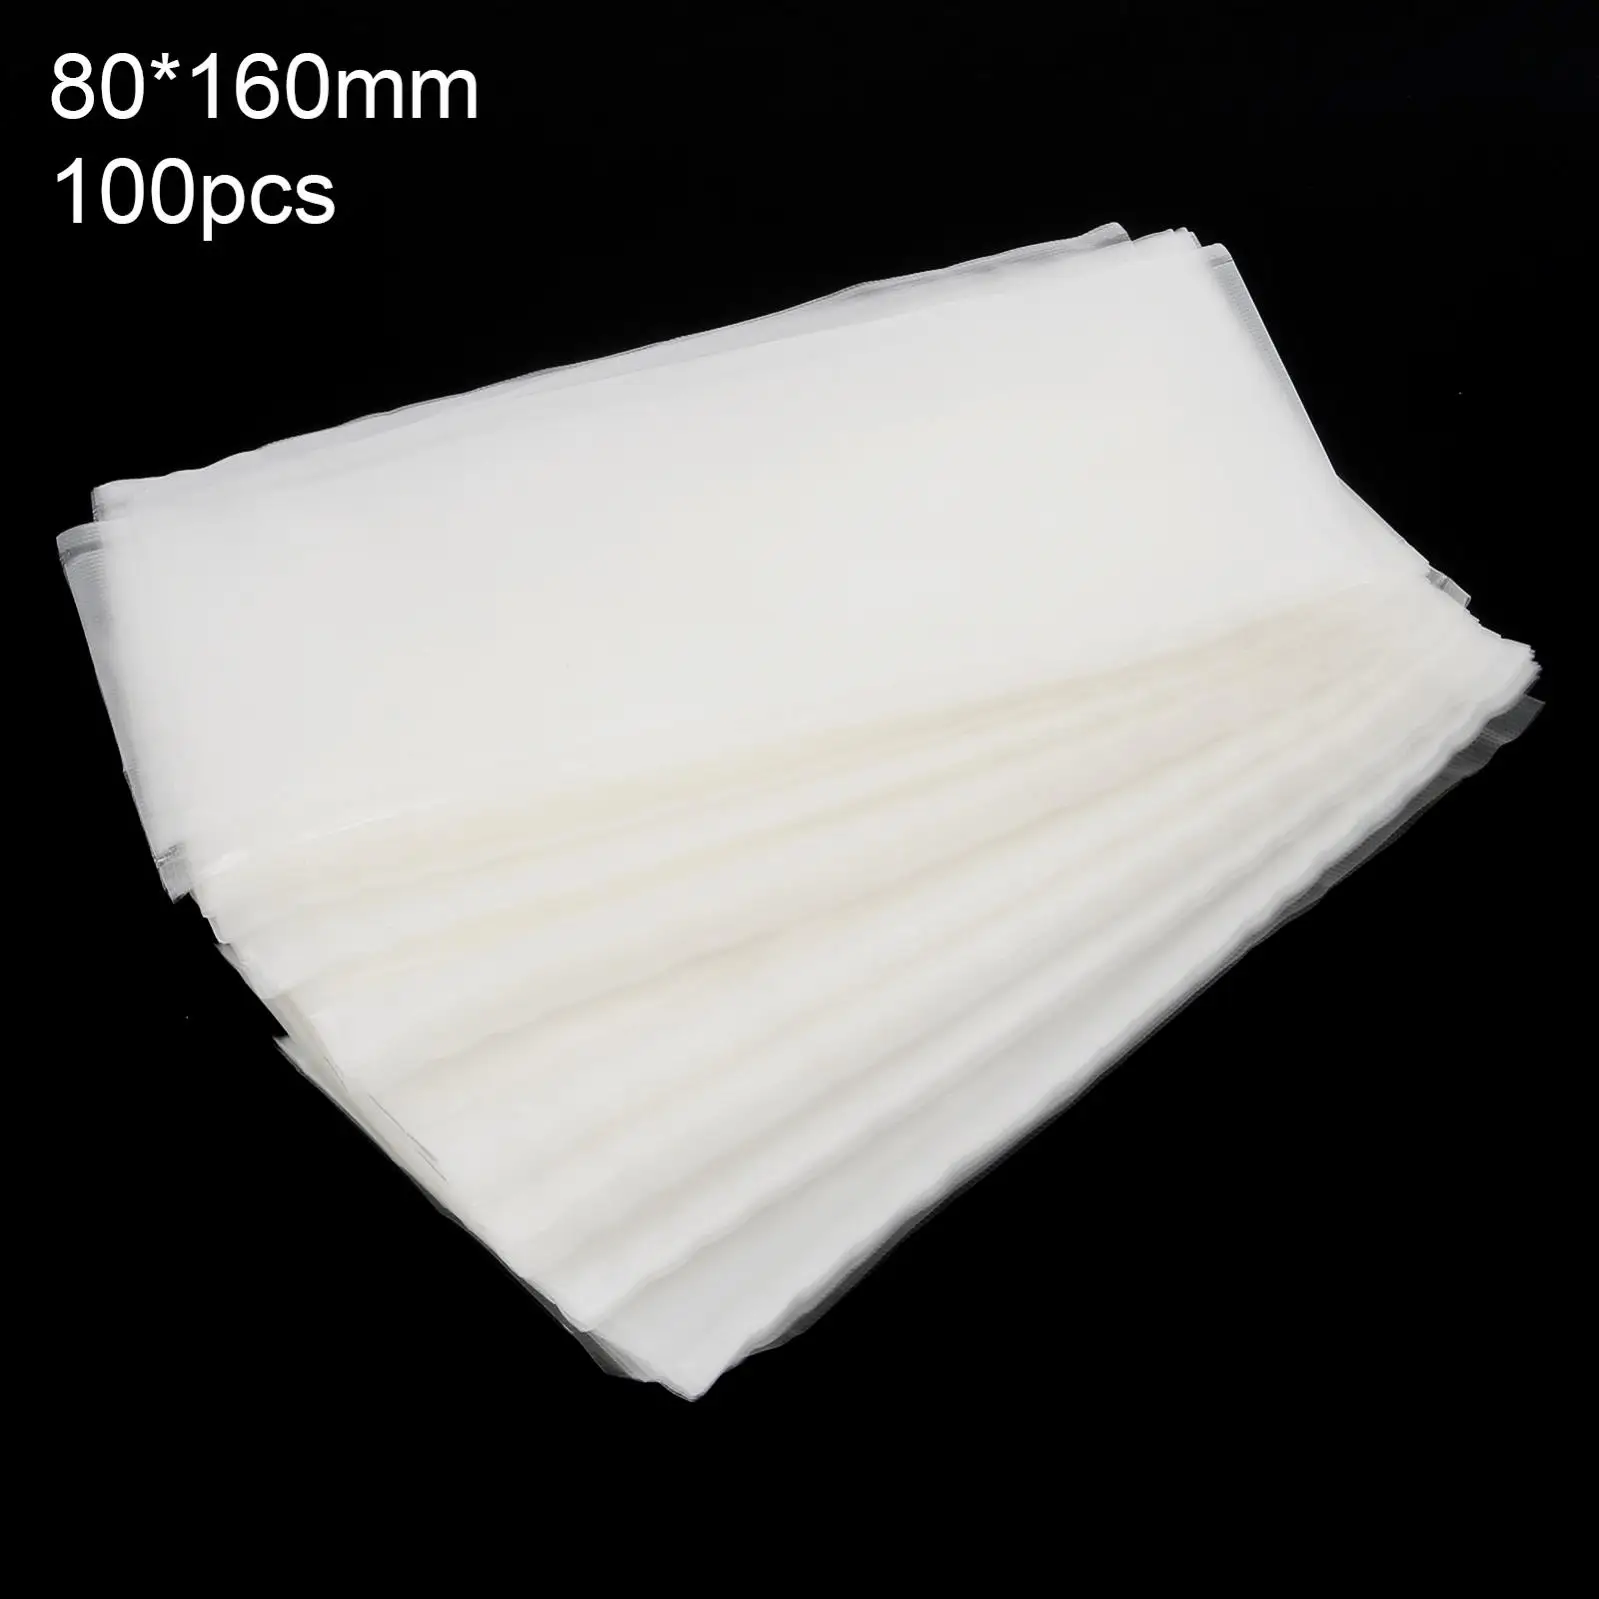 100pcs 3 Size Optional PVA Water Soluble Bag for Solid Baits Carp